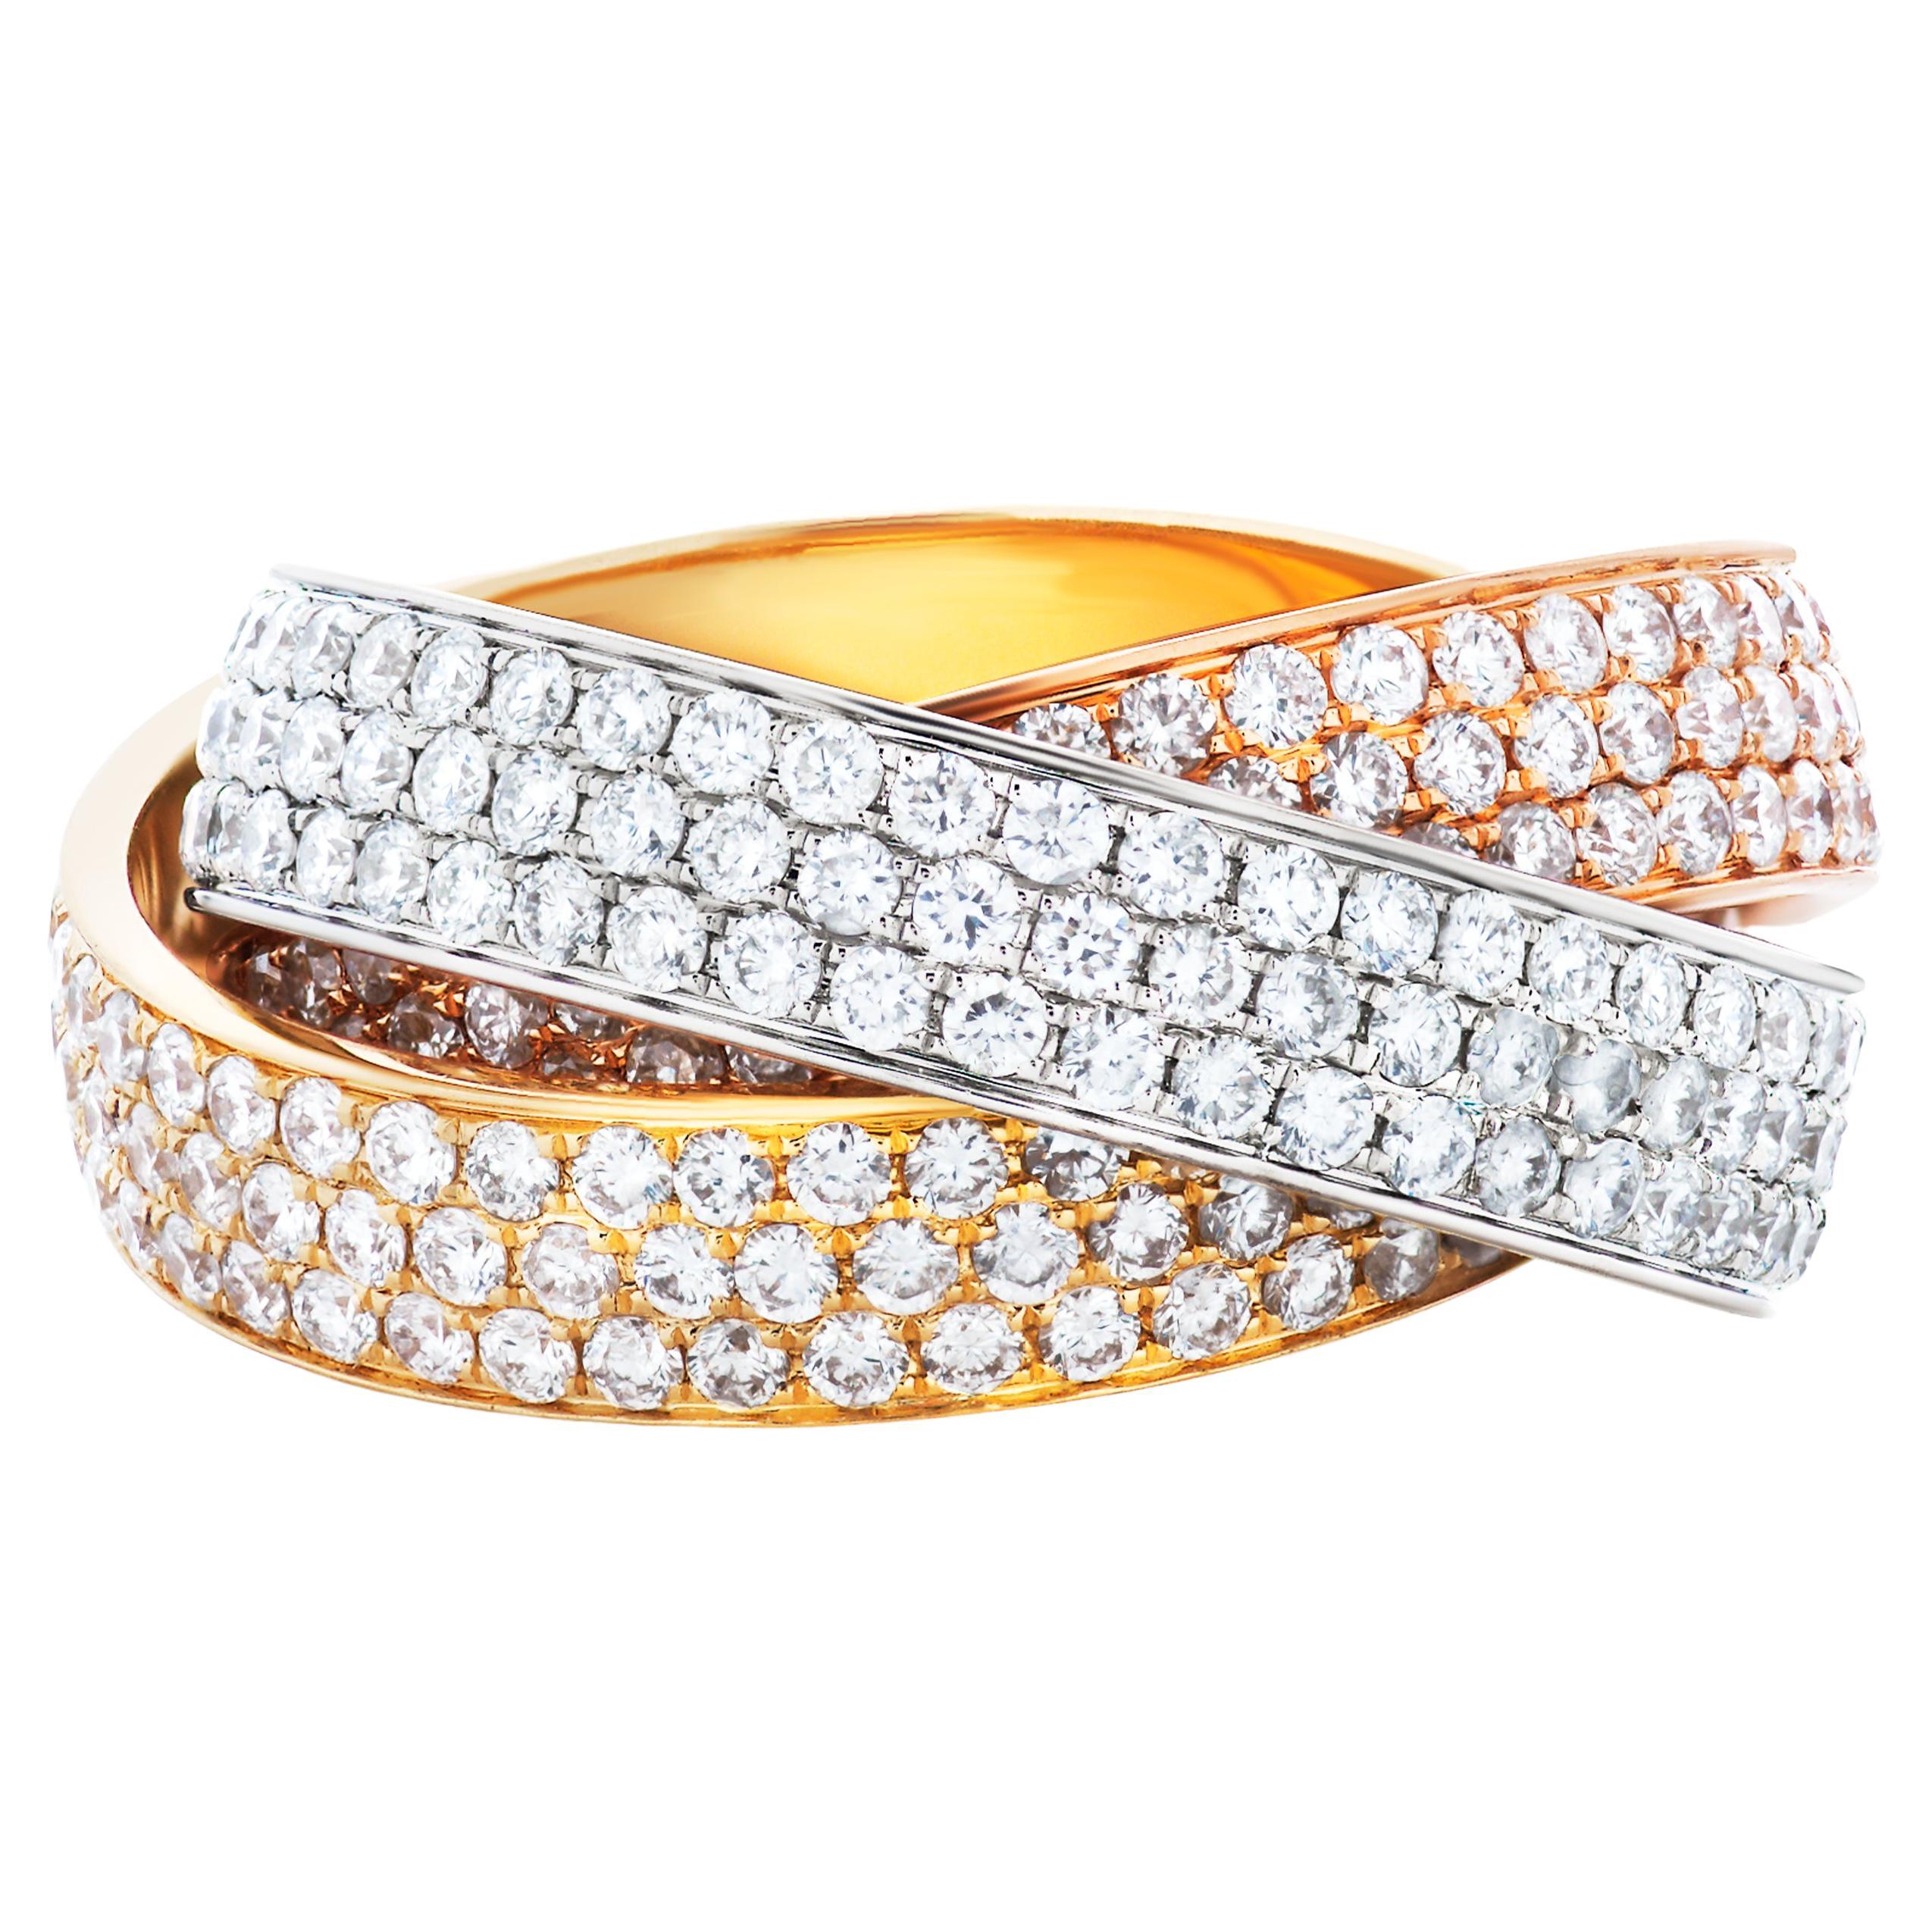 Cartier Large Model Diamond Trinity Ring in 18k White, Yellow and Rose Gold